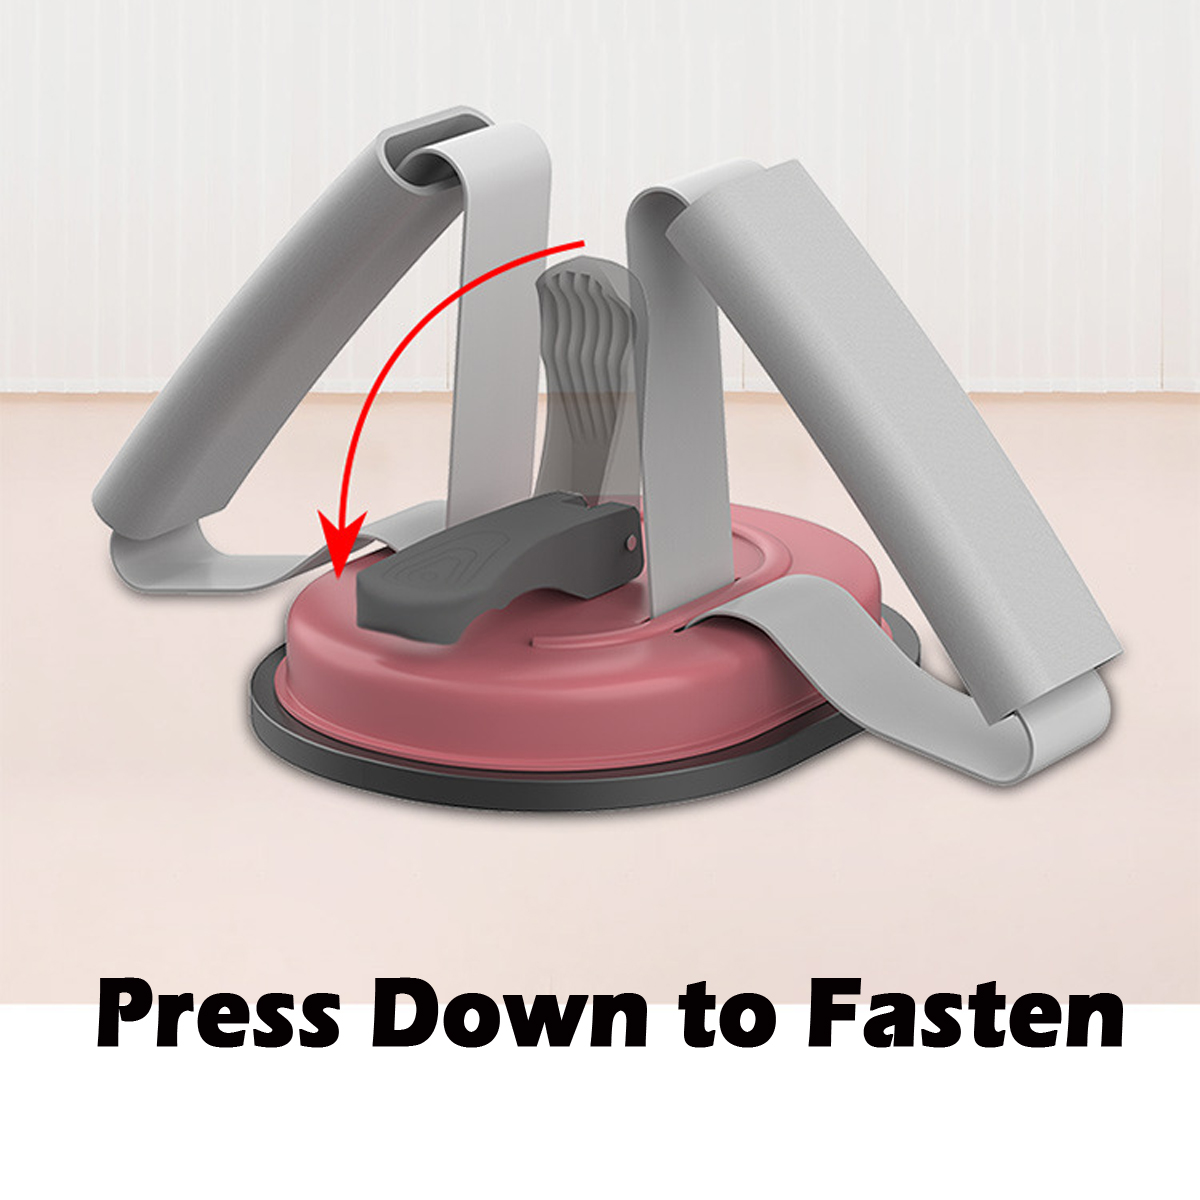 Portable-Adjustable-Sit-Up-Assist-Abdominal-Muscle-Training-Fitness-Sit-Up-Suction-Home-Gym-Exercise-1687853-7